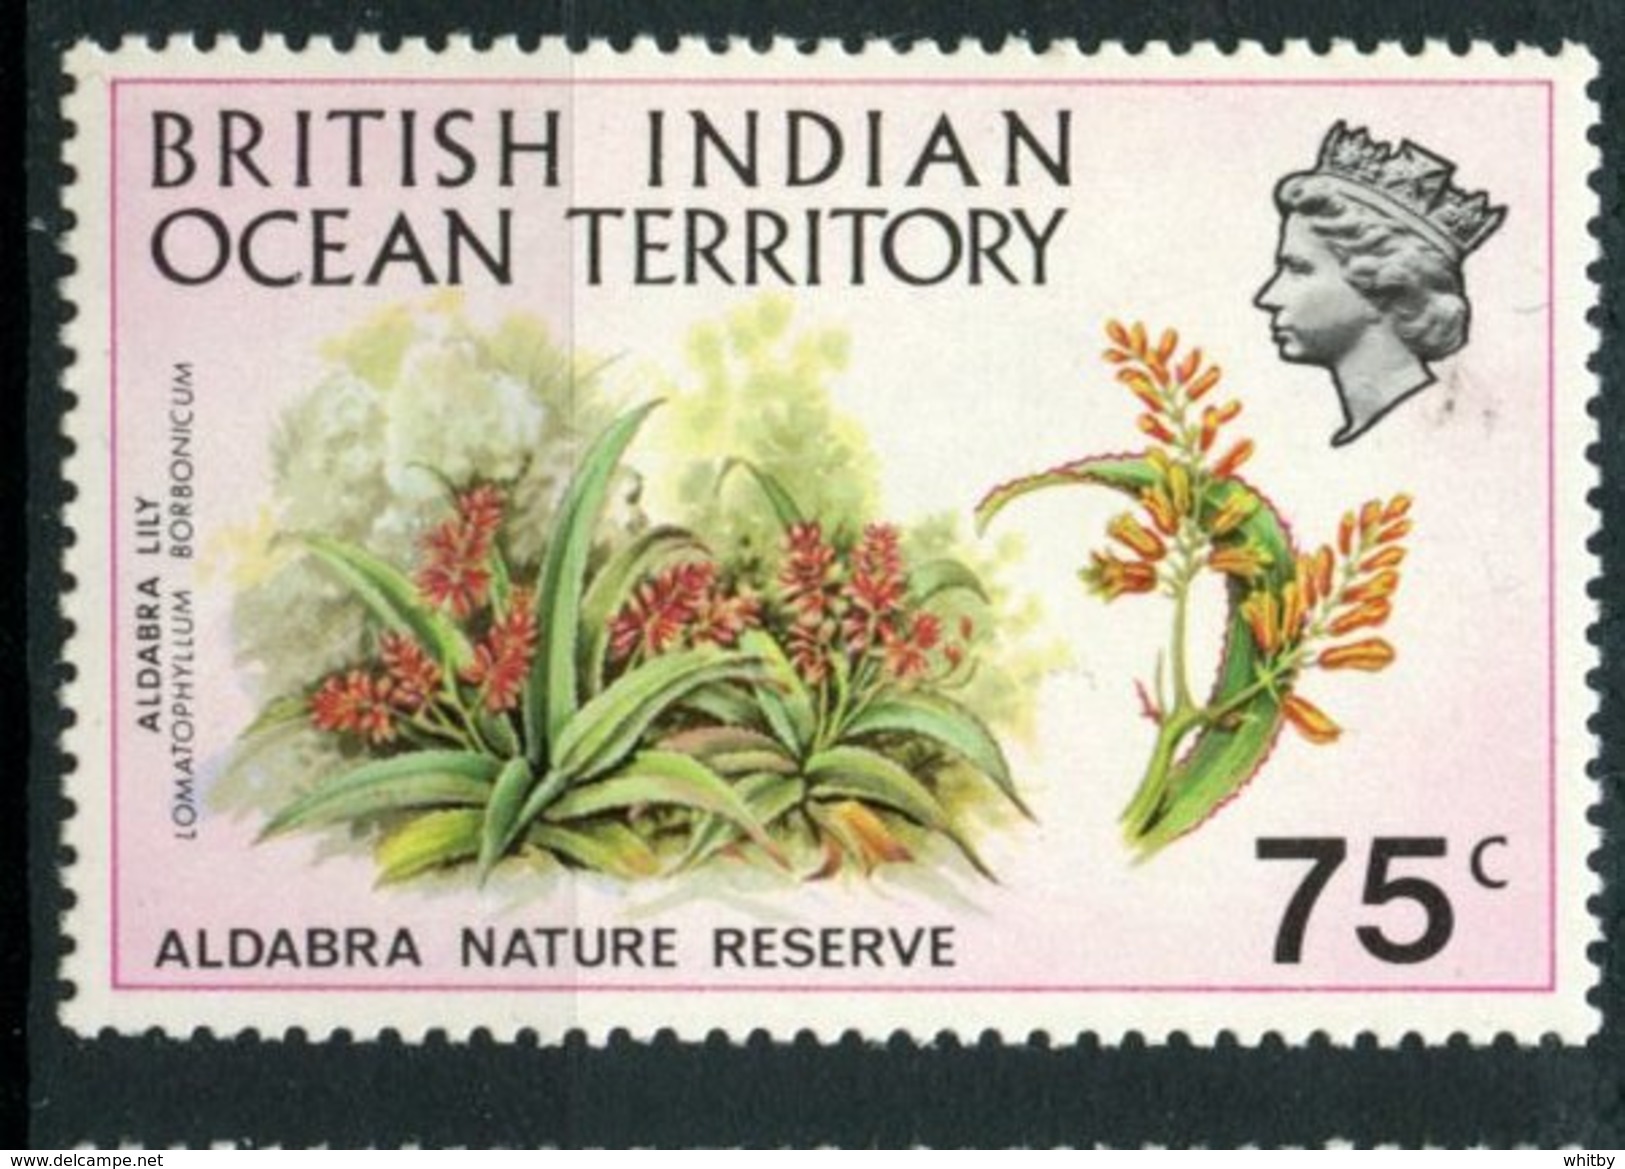 British Indian Ocean Territory 1971 75c Lily Issue  #40 MH - British Indian Ocean Territory (BIOT)